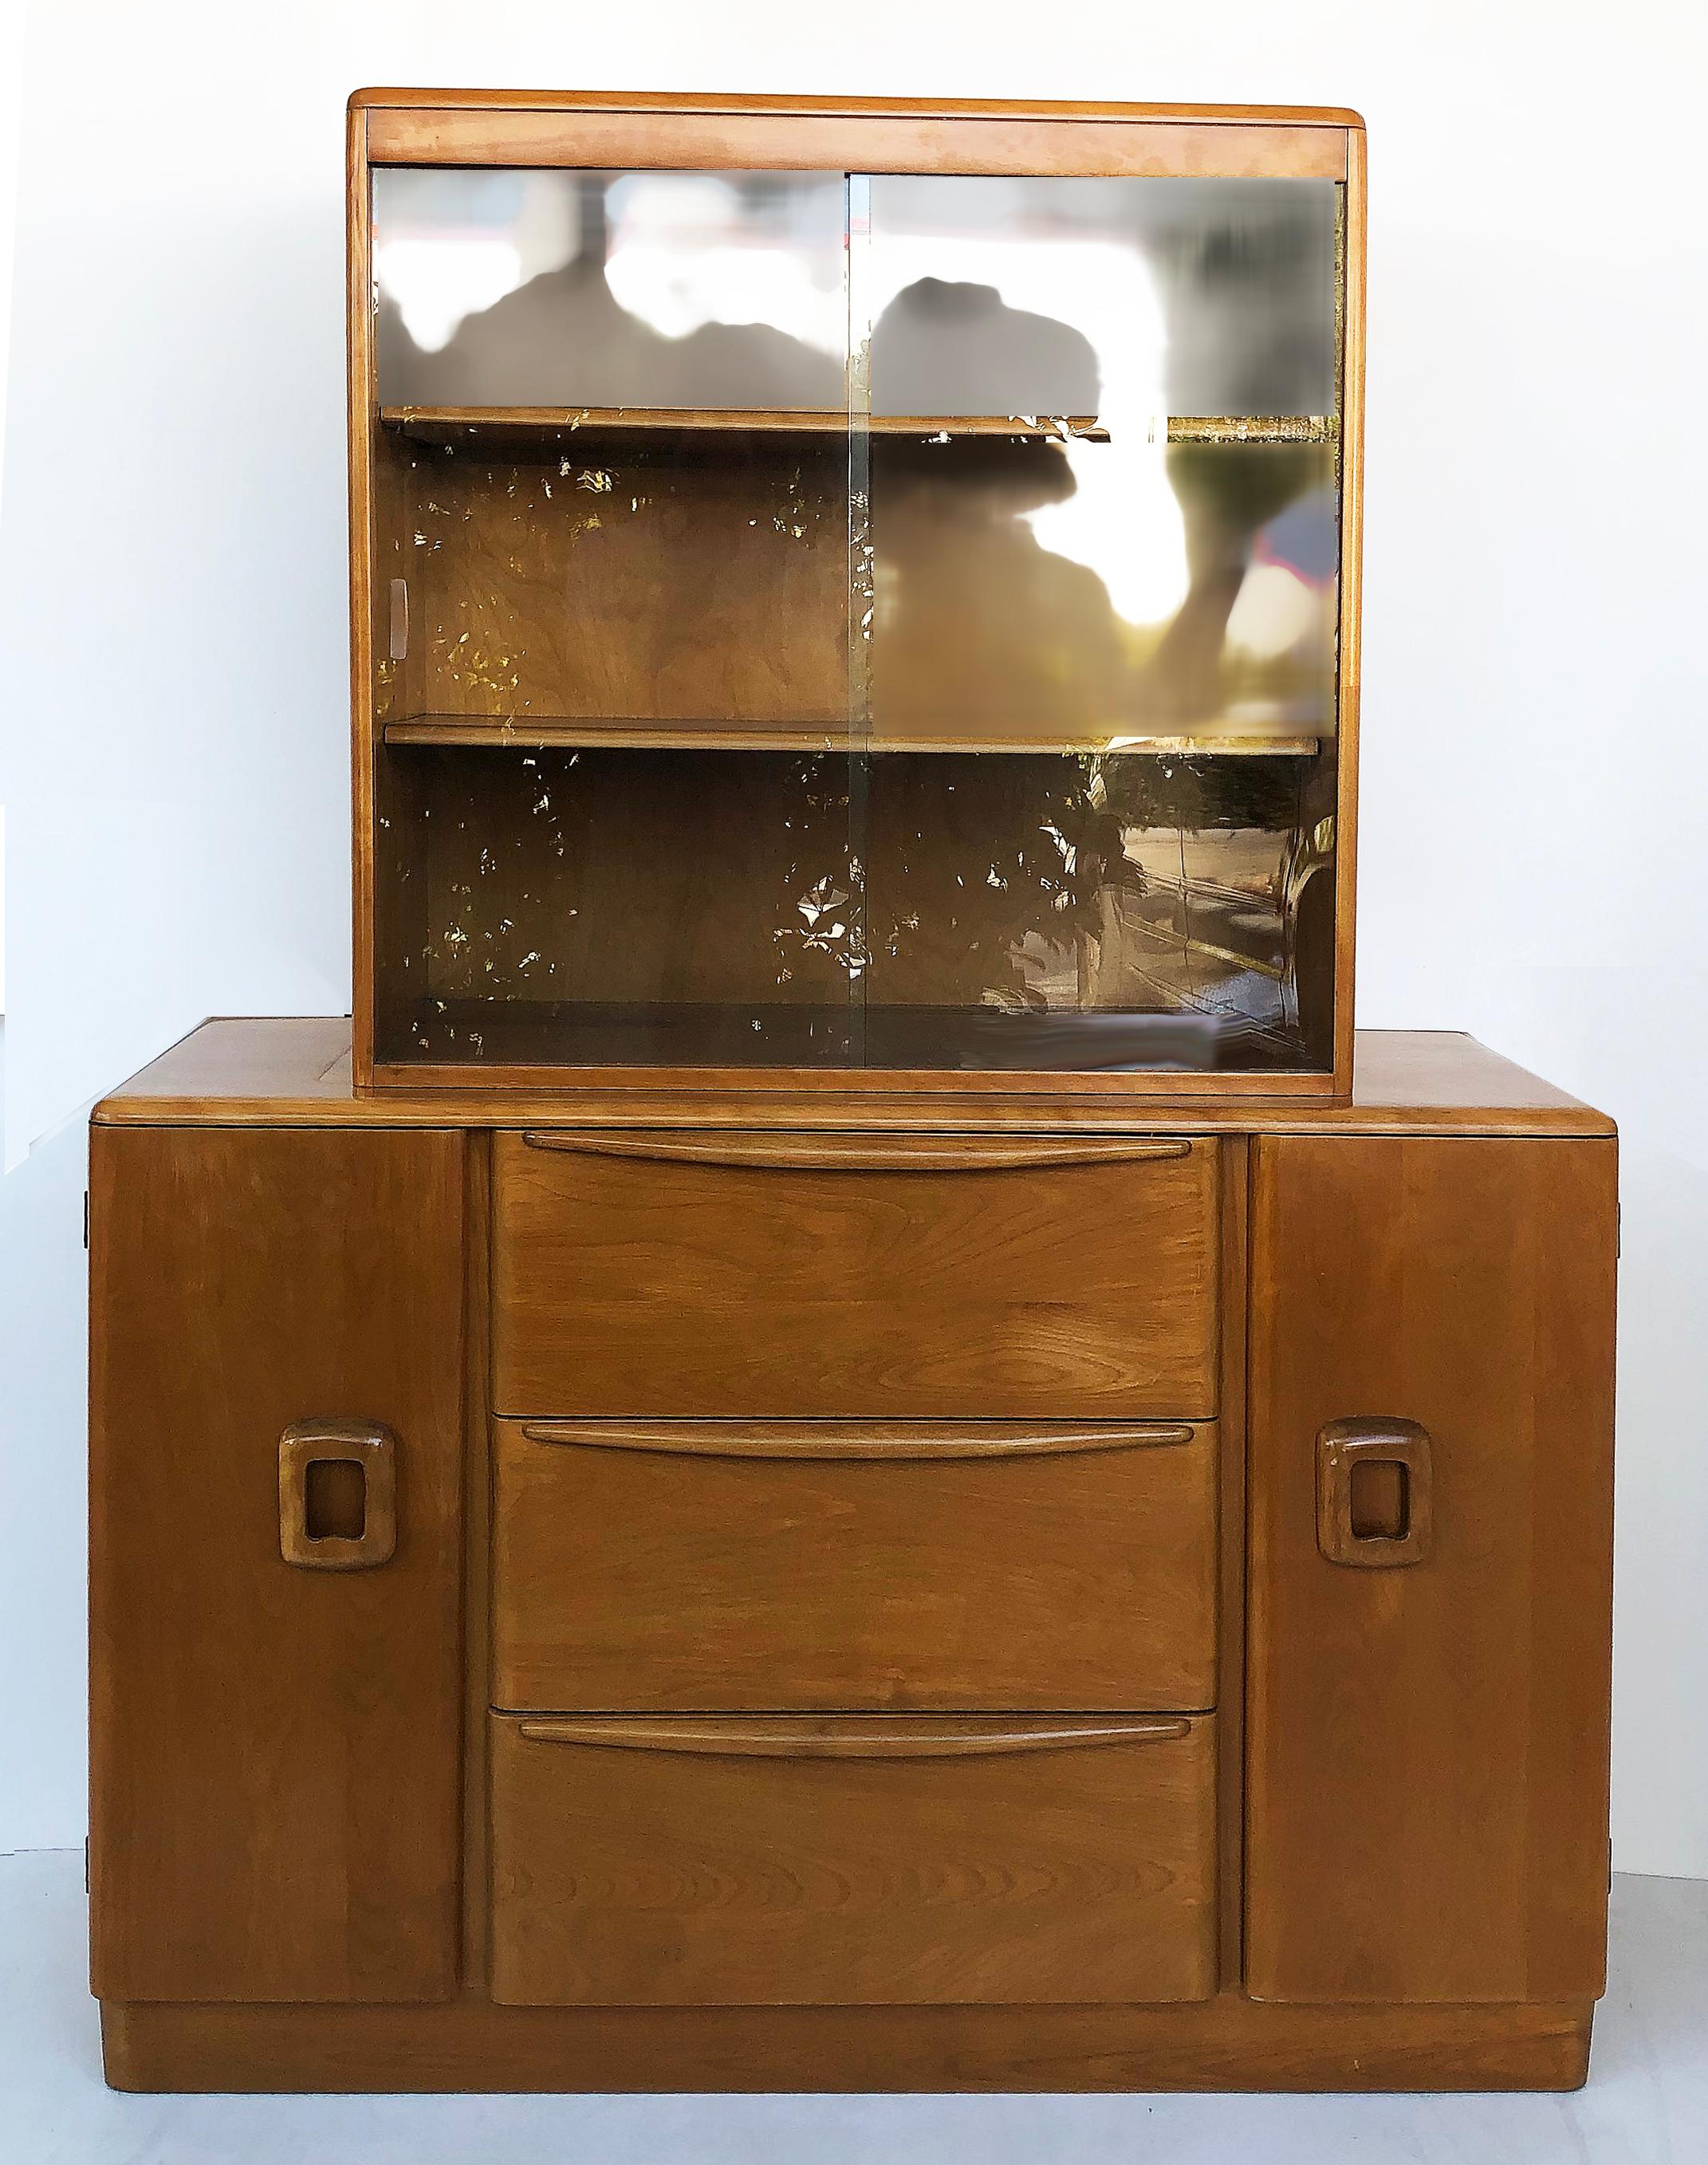 Mid-century Heywood-Wakefield Hutch on credenza

Offered for sale is a 1950s Mid-Century Modern Heywood-Wakefield Hutch on the M592 credenza. The removable hutch has sliding glass doors and can be used on top of or separate from the credenza